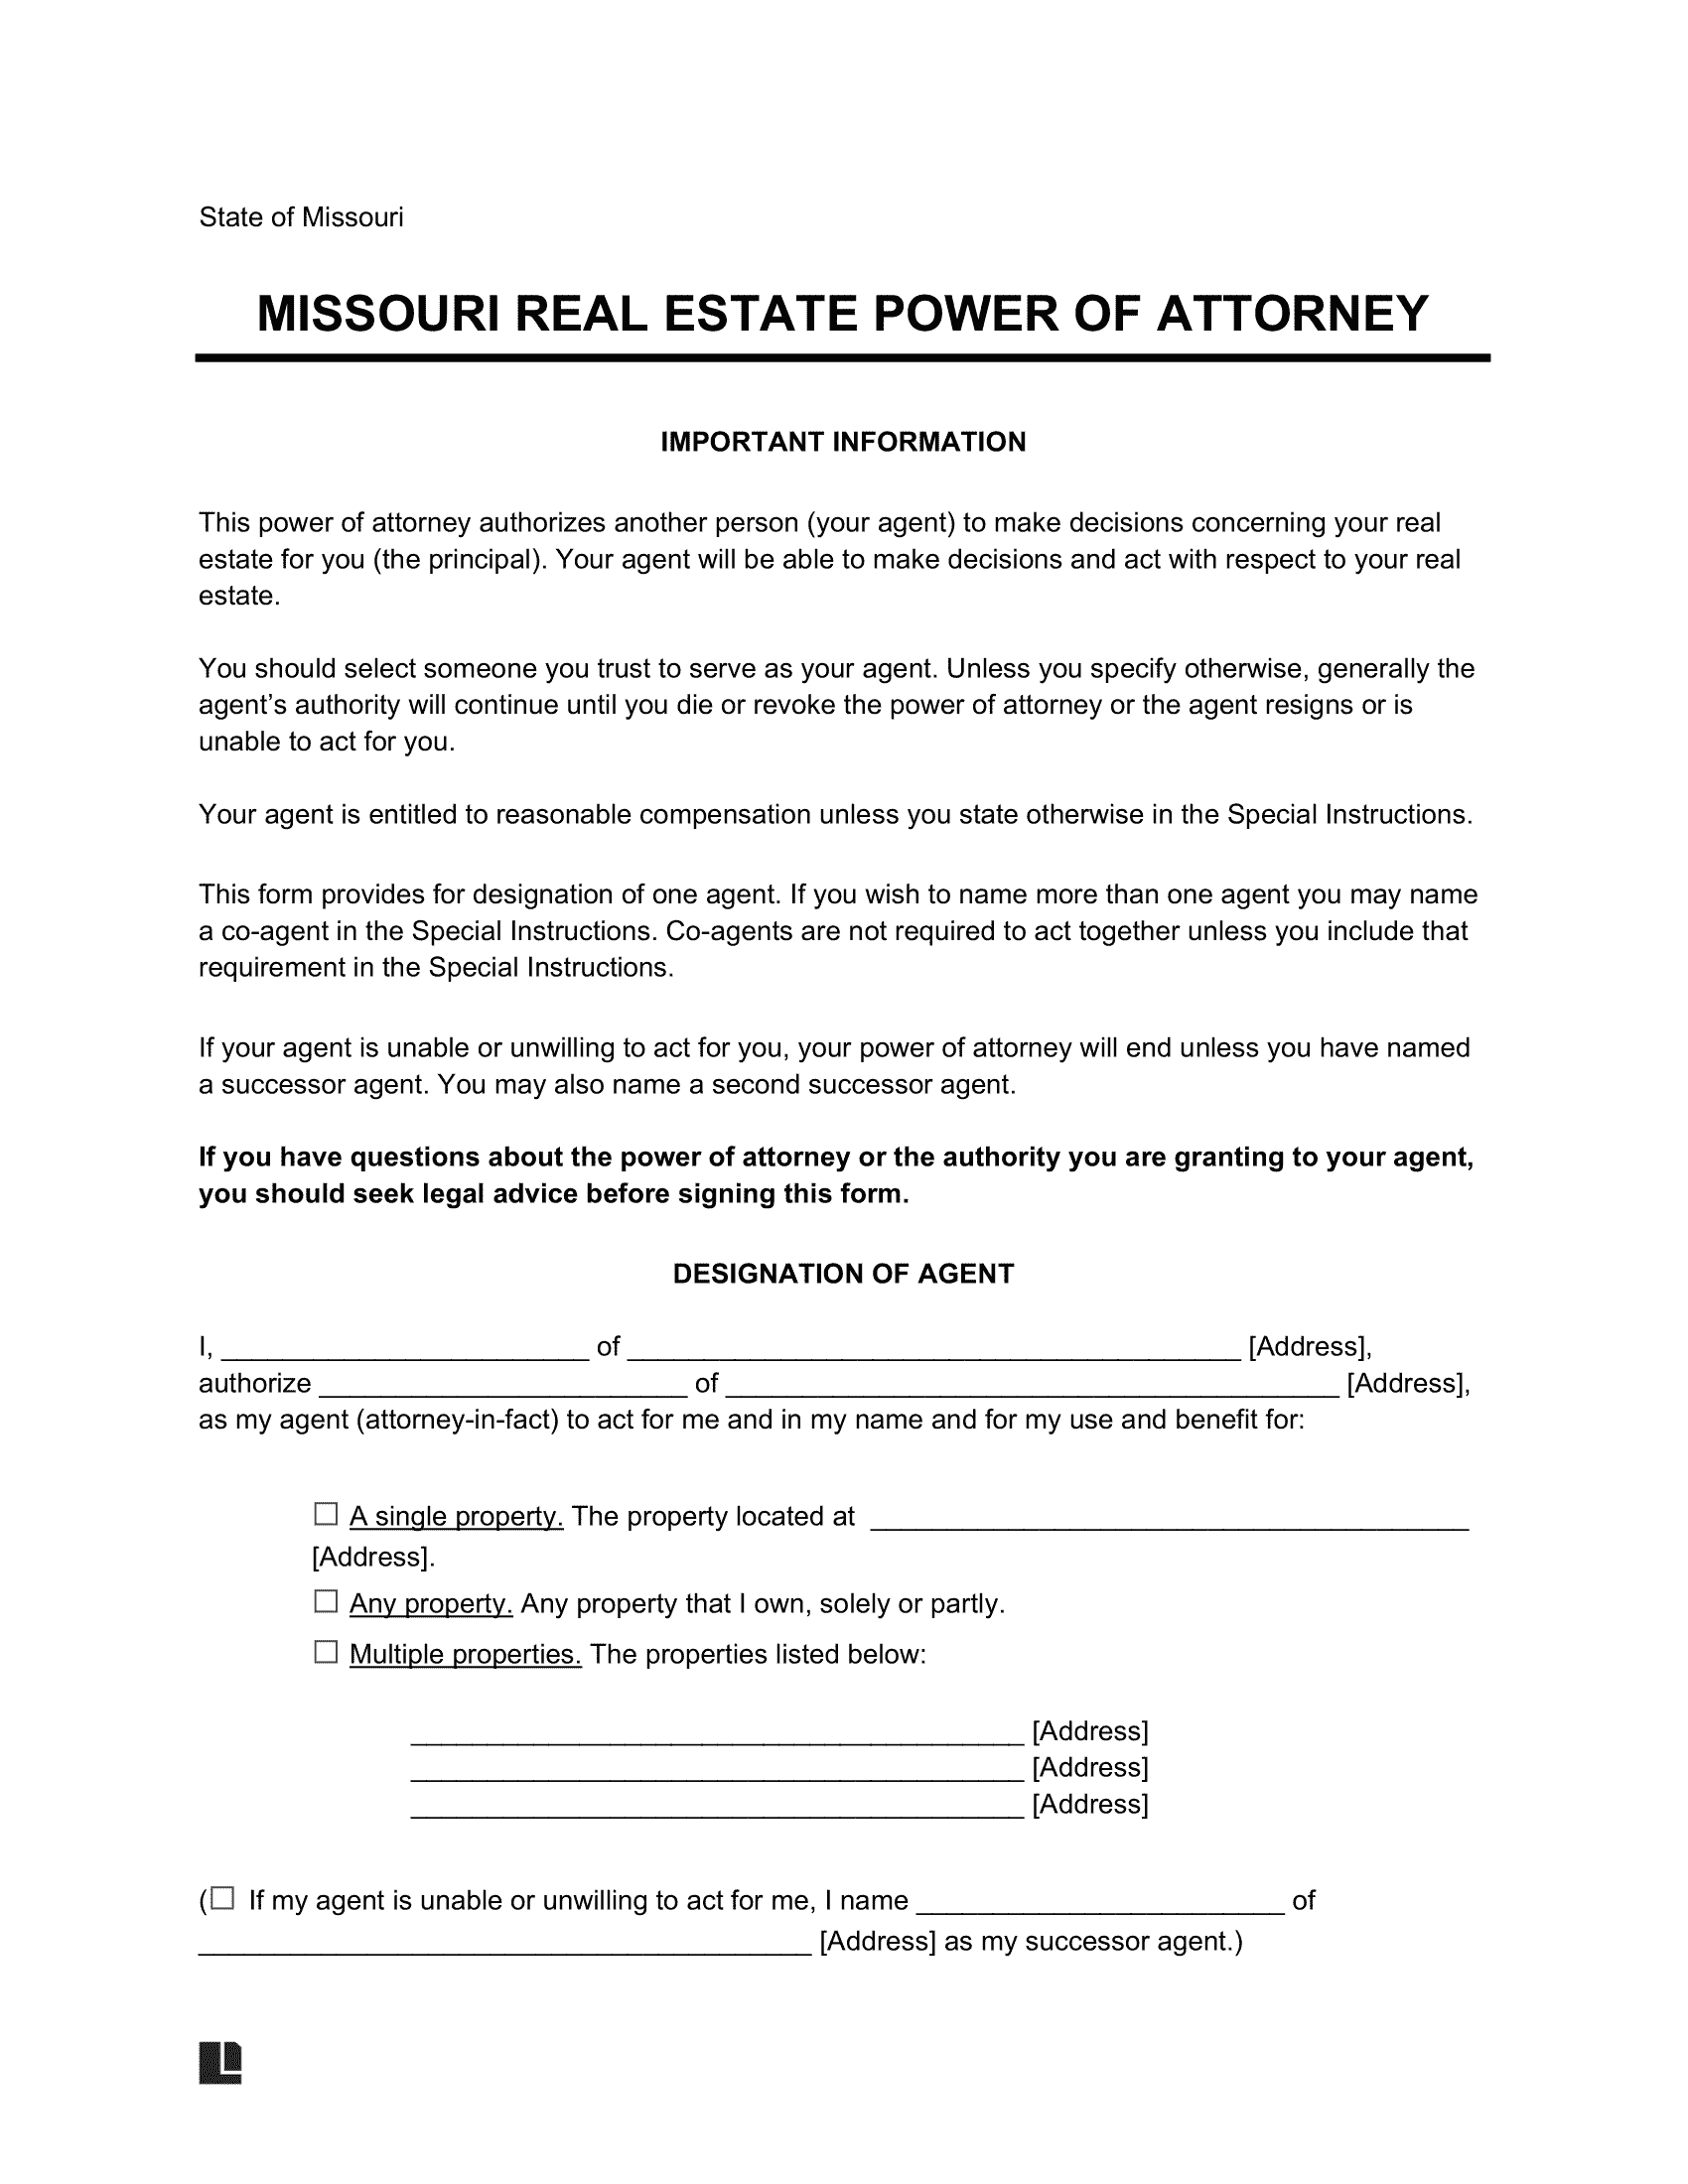 Missouri Real Estate Power of Attorney Form